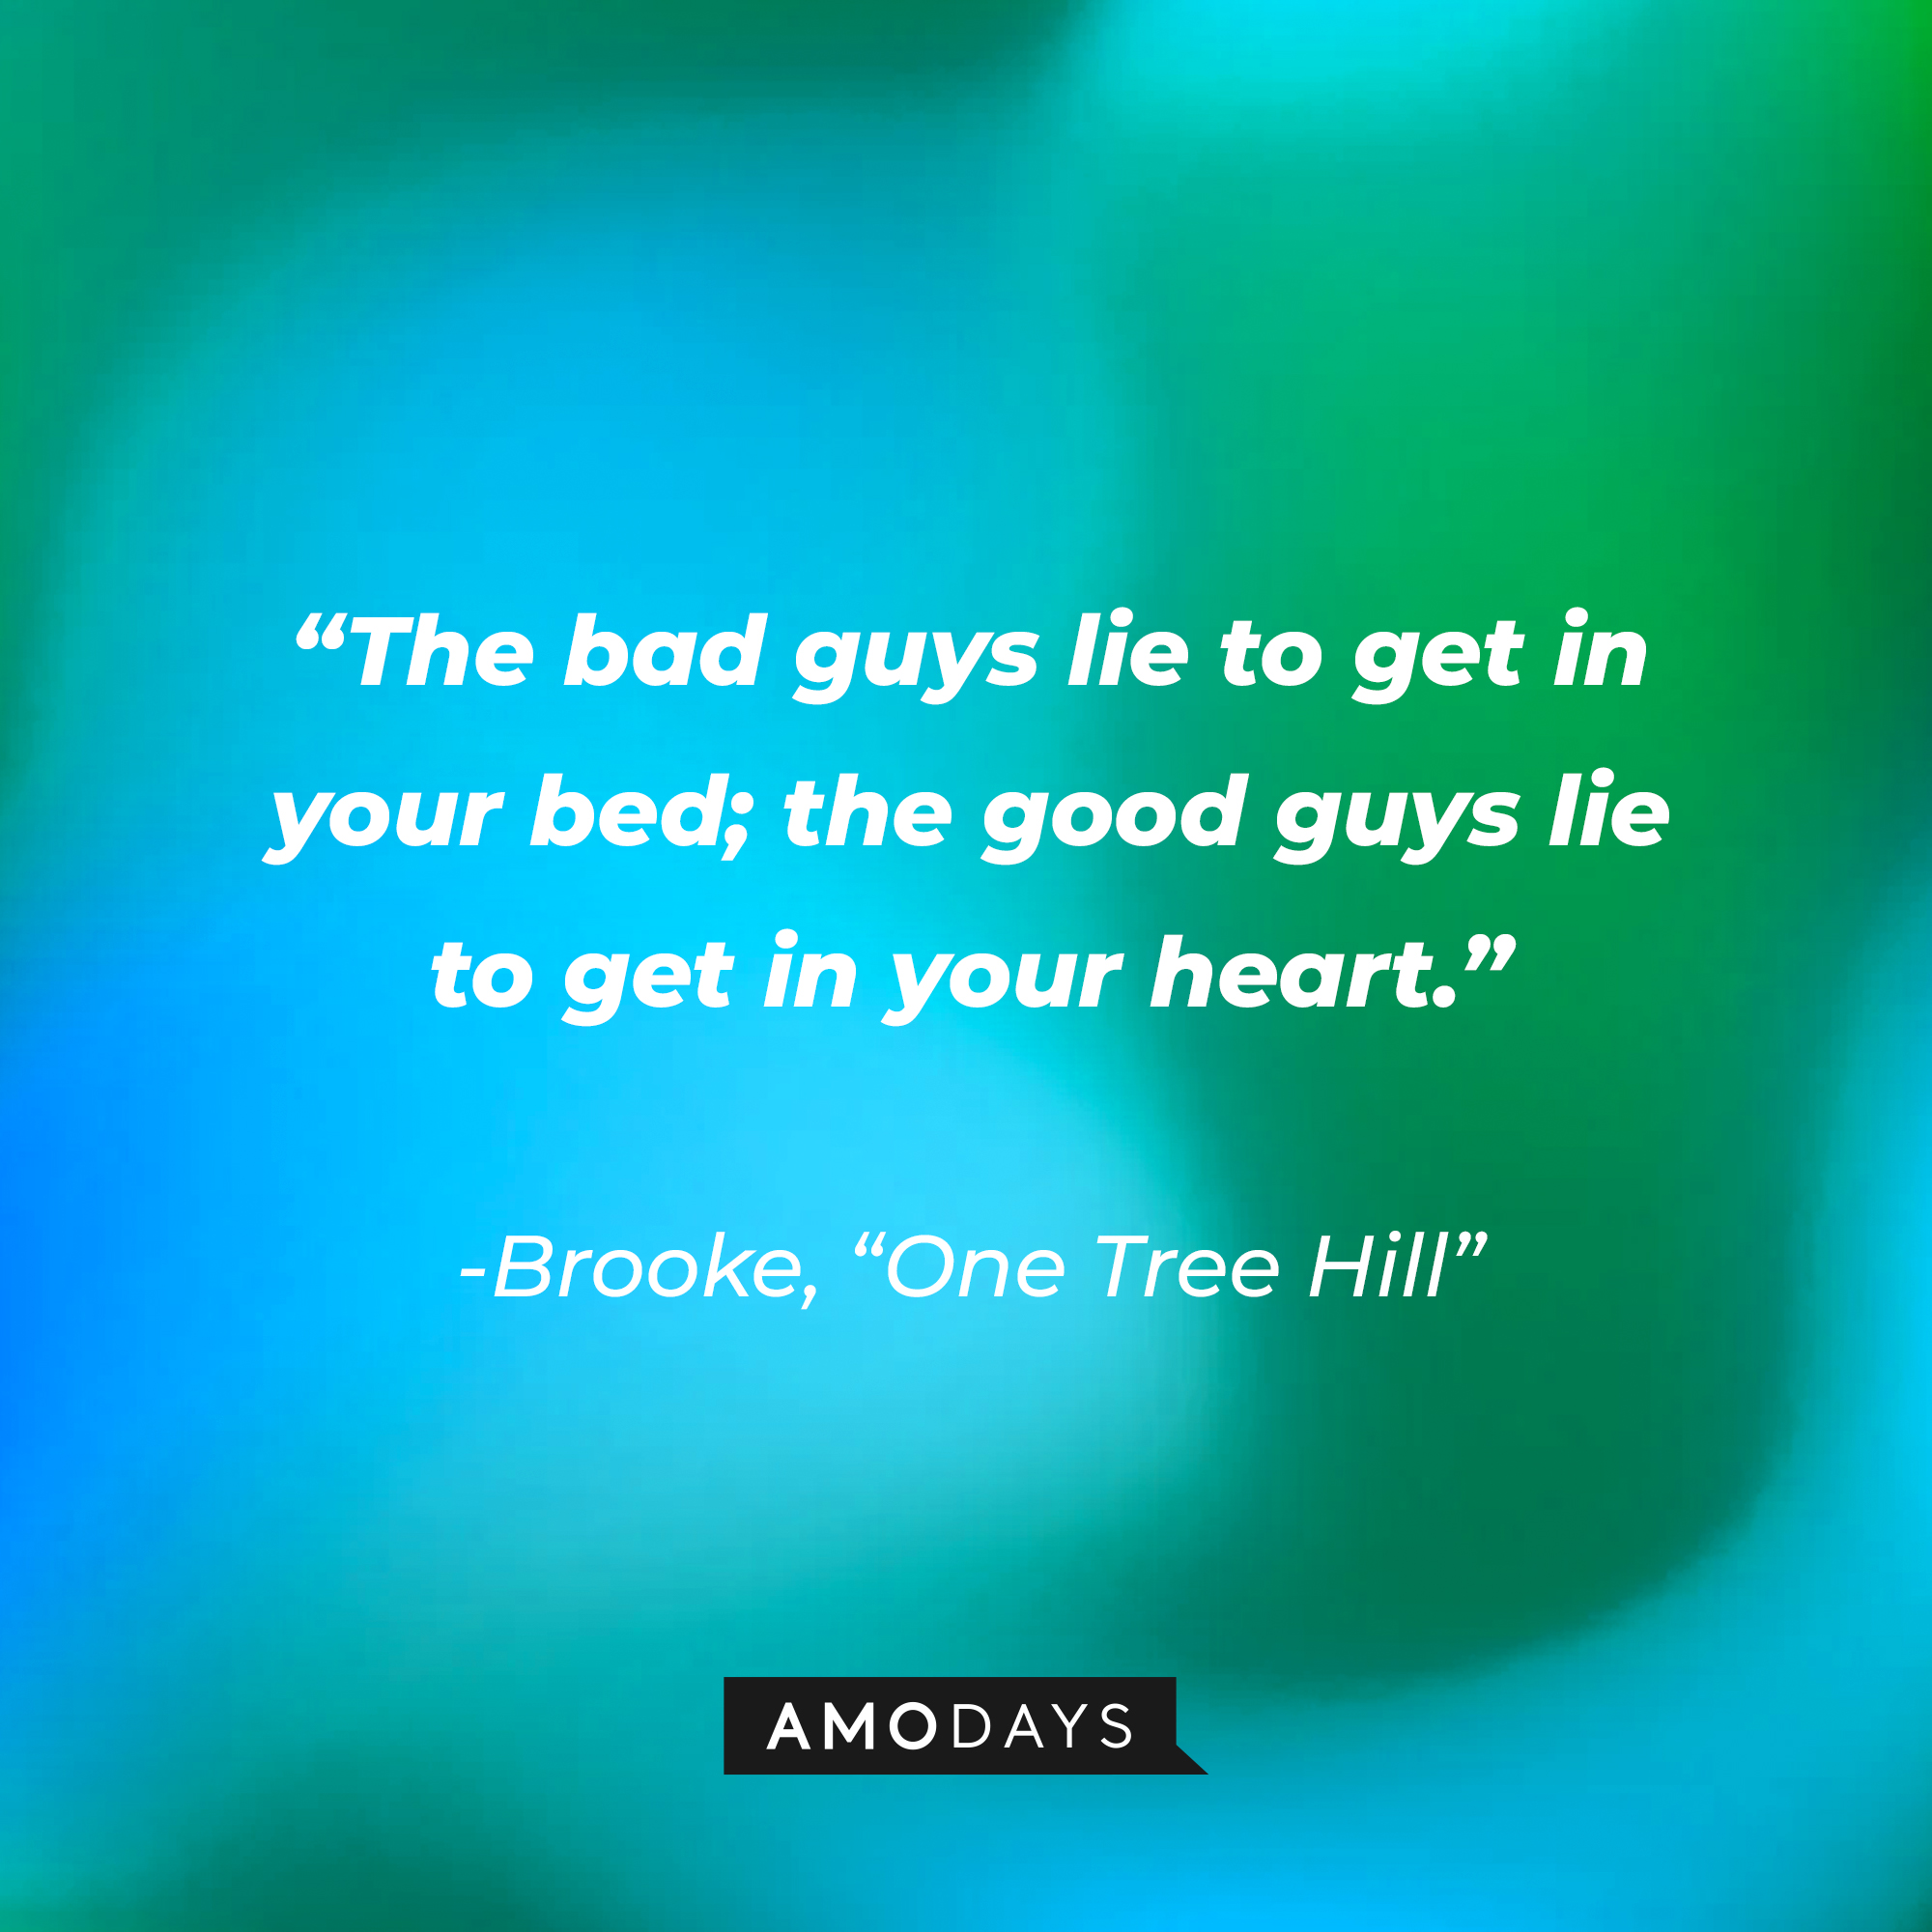 Brooke’s quote from “One Tree Hill”: “The bad guys lie to get in your bed; the good guys lie to get in your heart.” | Source: AmoDays